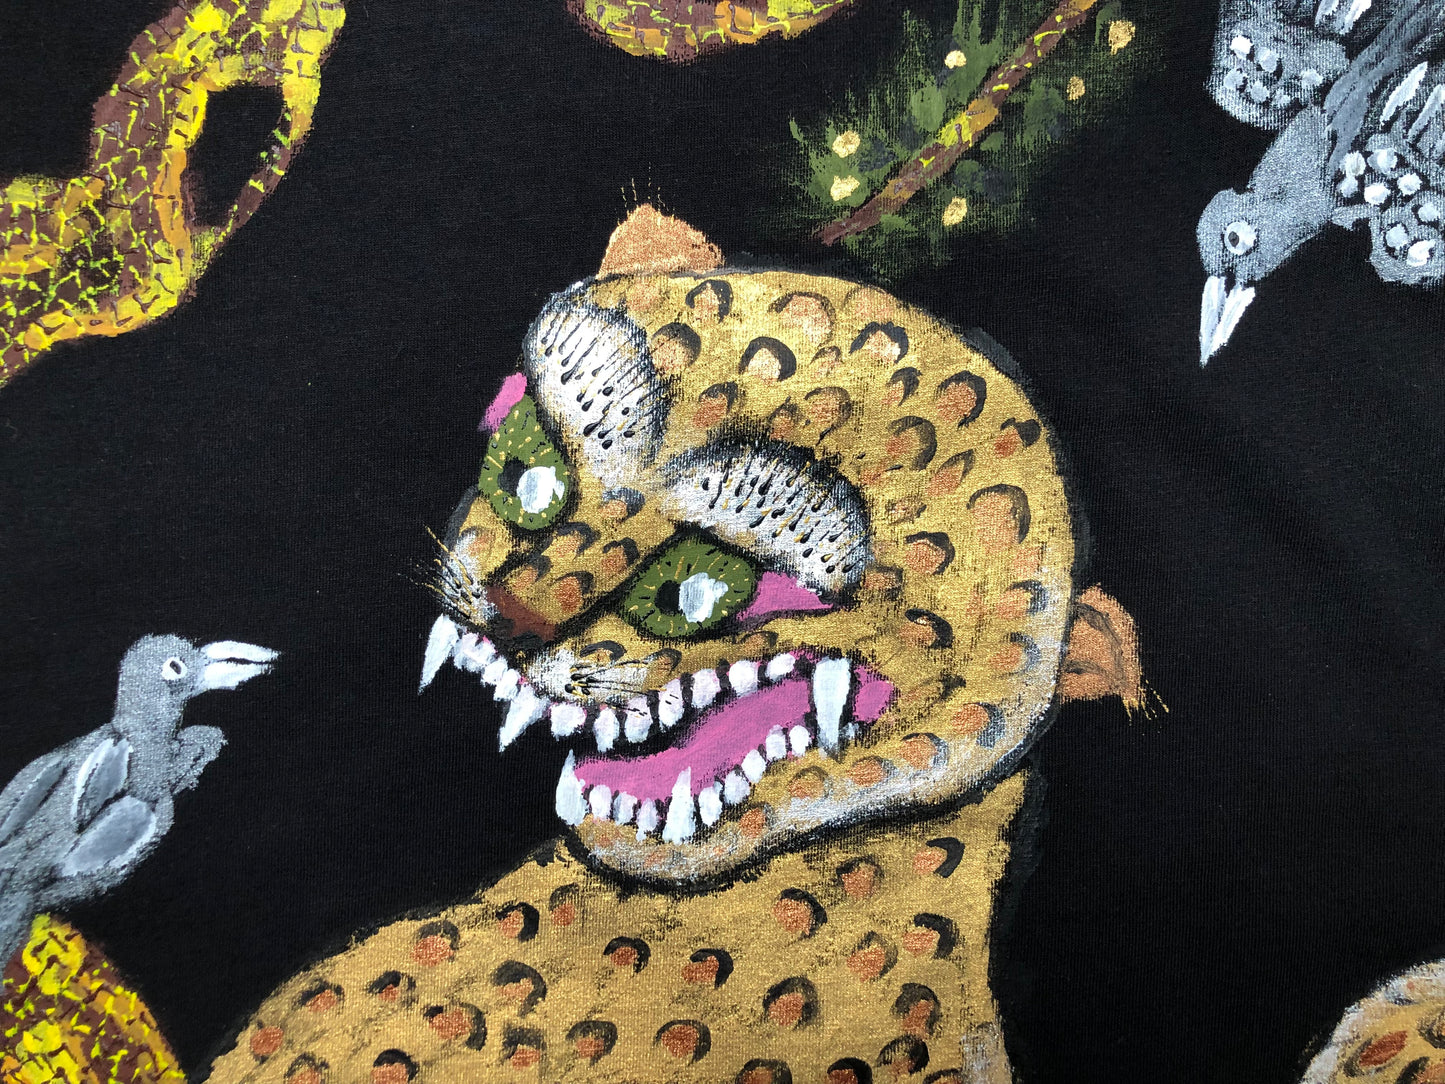 Detailed muzzle of the beast with fangs and green eyes and a bird on women's clothing